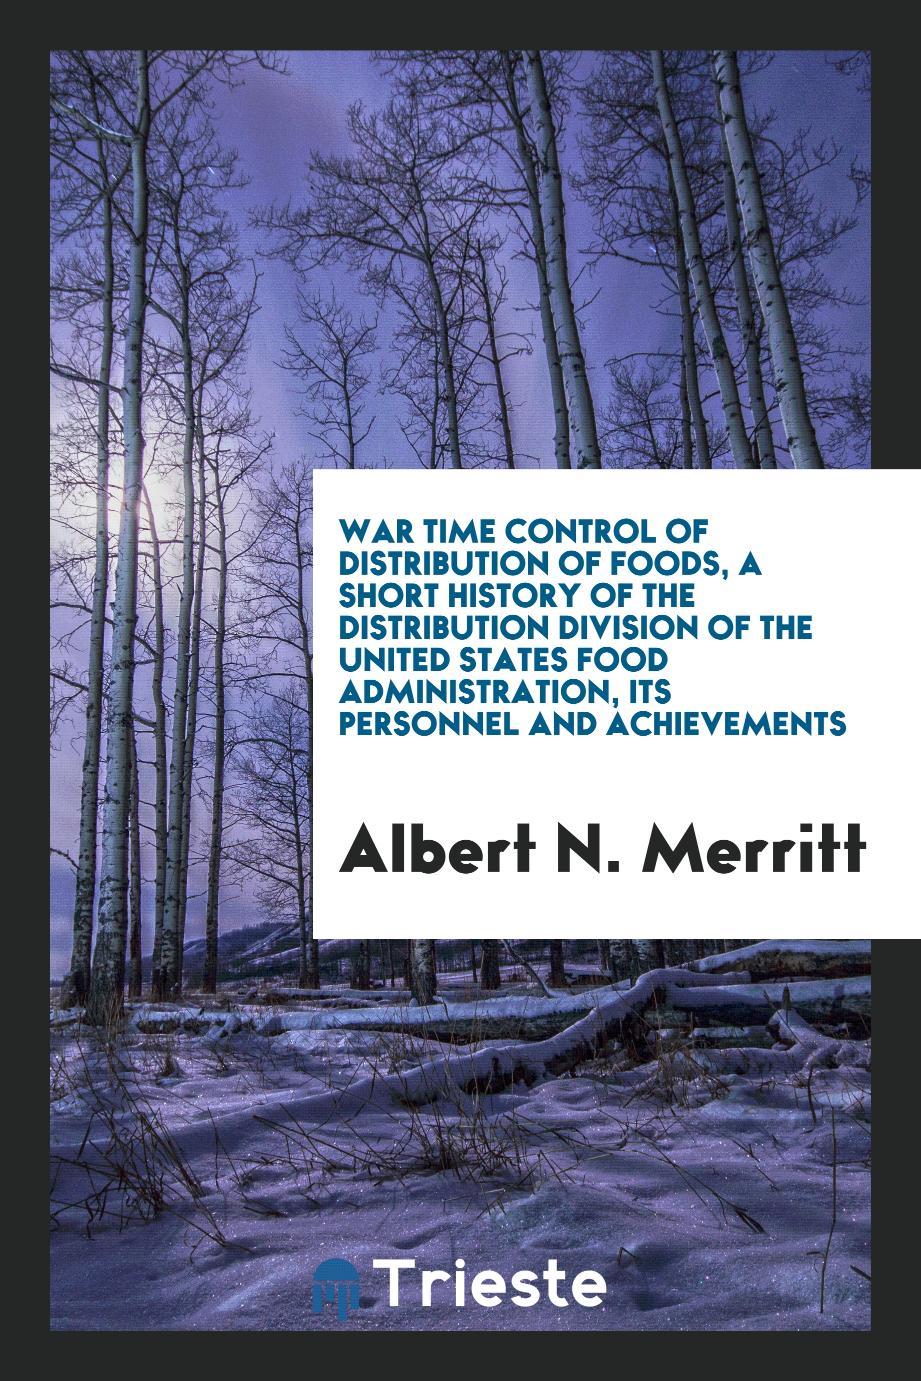 War time control of distribution of foods, a short history of the Distribution division of the United States Food administration, its personnel and achievements